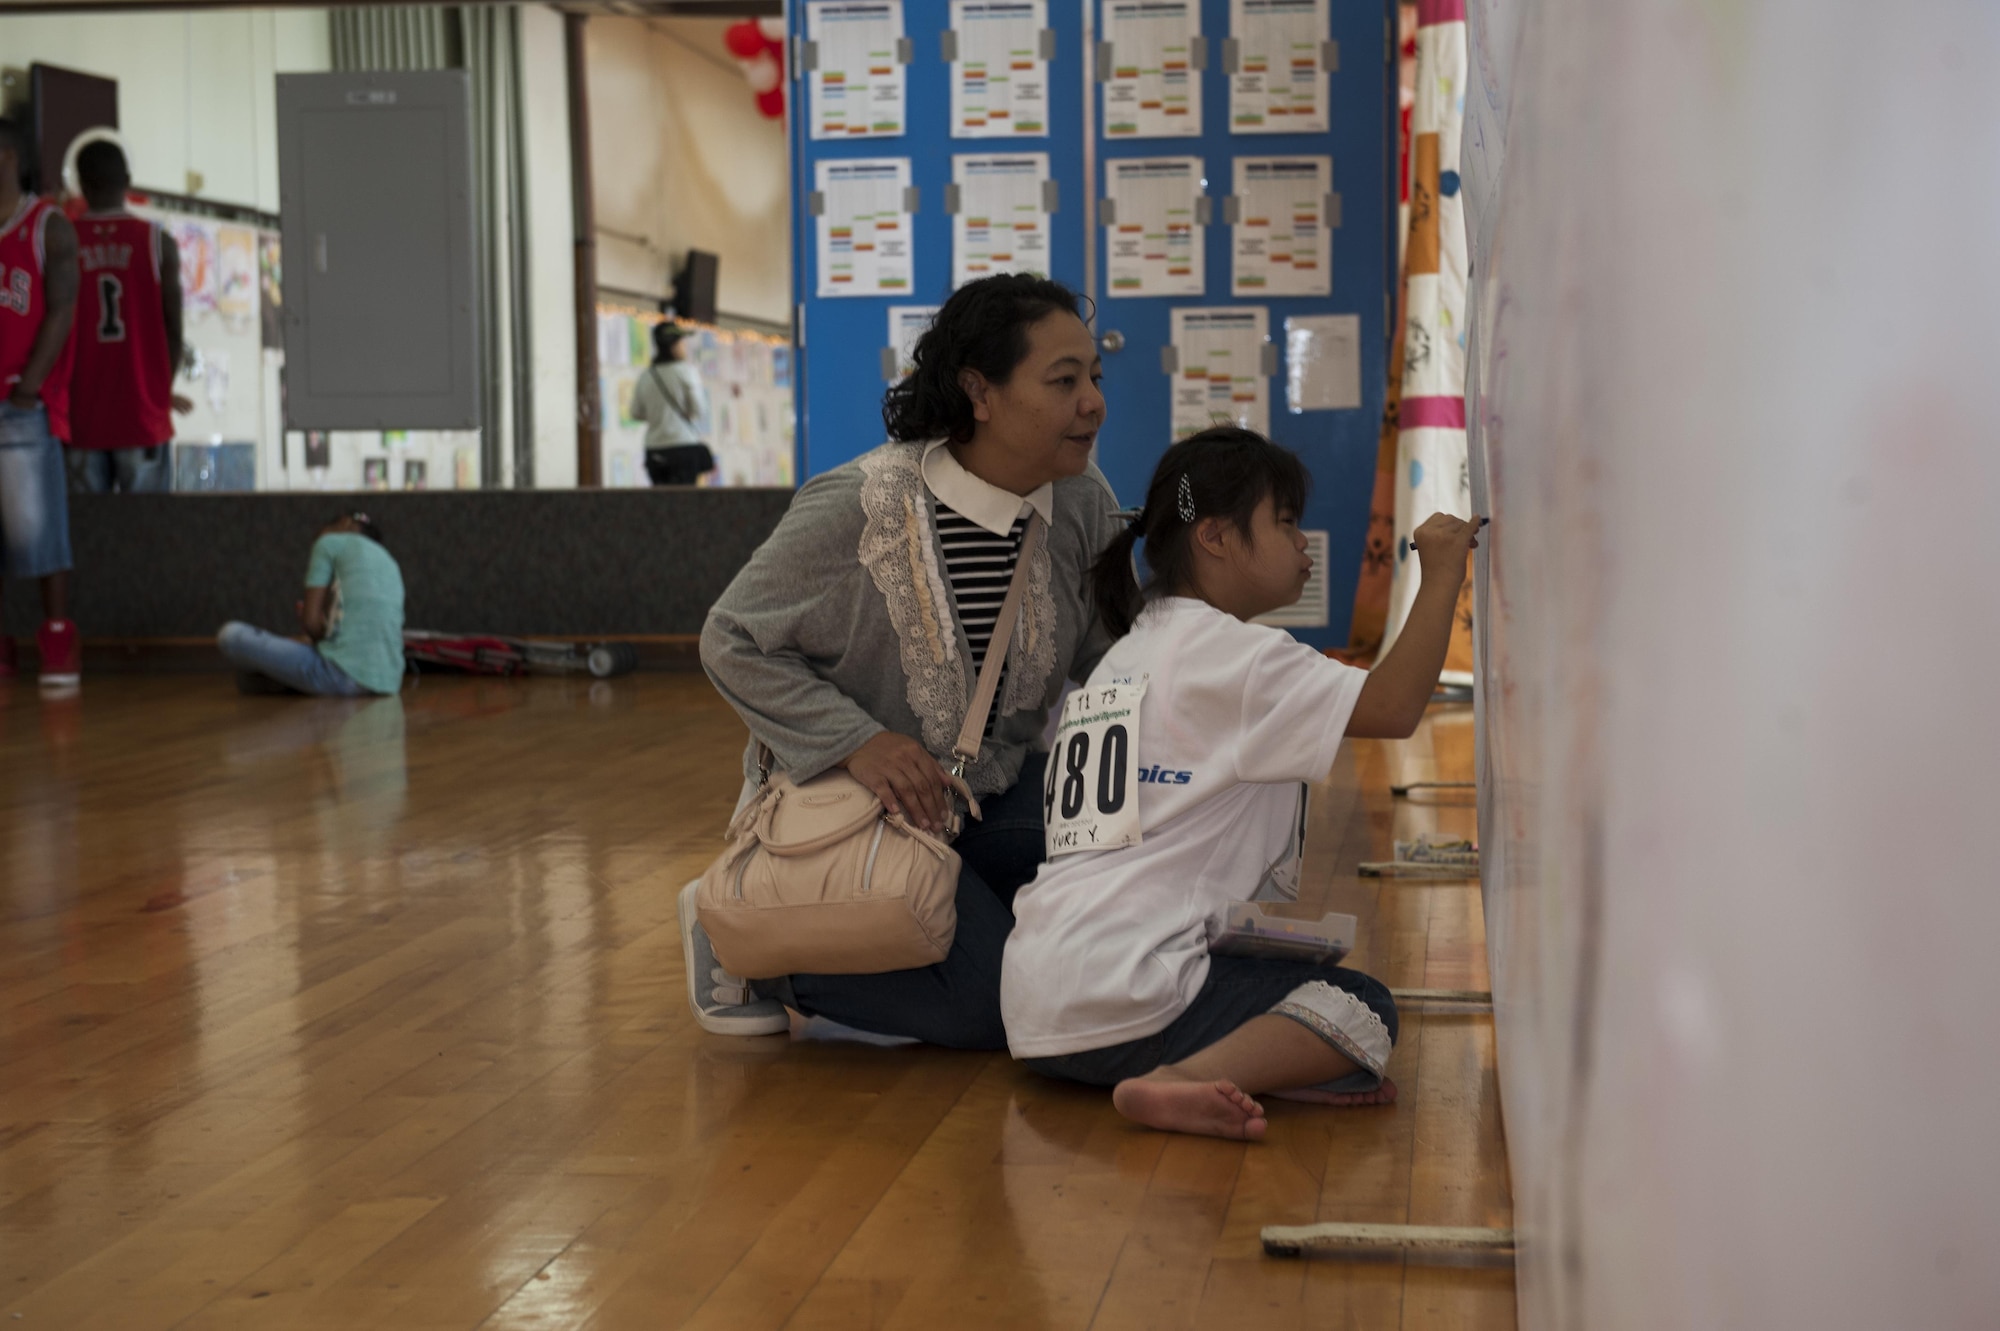 Yuri Yonaha, a Kadena Special Olympics athlete, draws on a canvas while her mother observes at the art exhibit during the Kadena Special Olympics Nov. 7, 2015, at Kadena Air Base, Japan. Thousands of spectators from Japan and the U.S. came out to support approximately 880 athletes and artists participating in the 16th annual KSO games and art show. (U.S. Air Force photo by Airman 1st Class Lynette M. Rolen/Released)